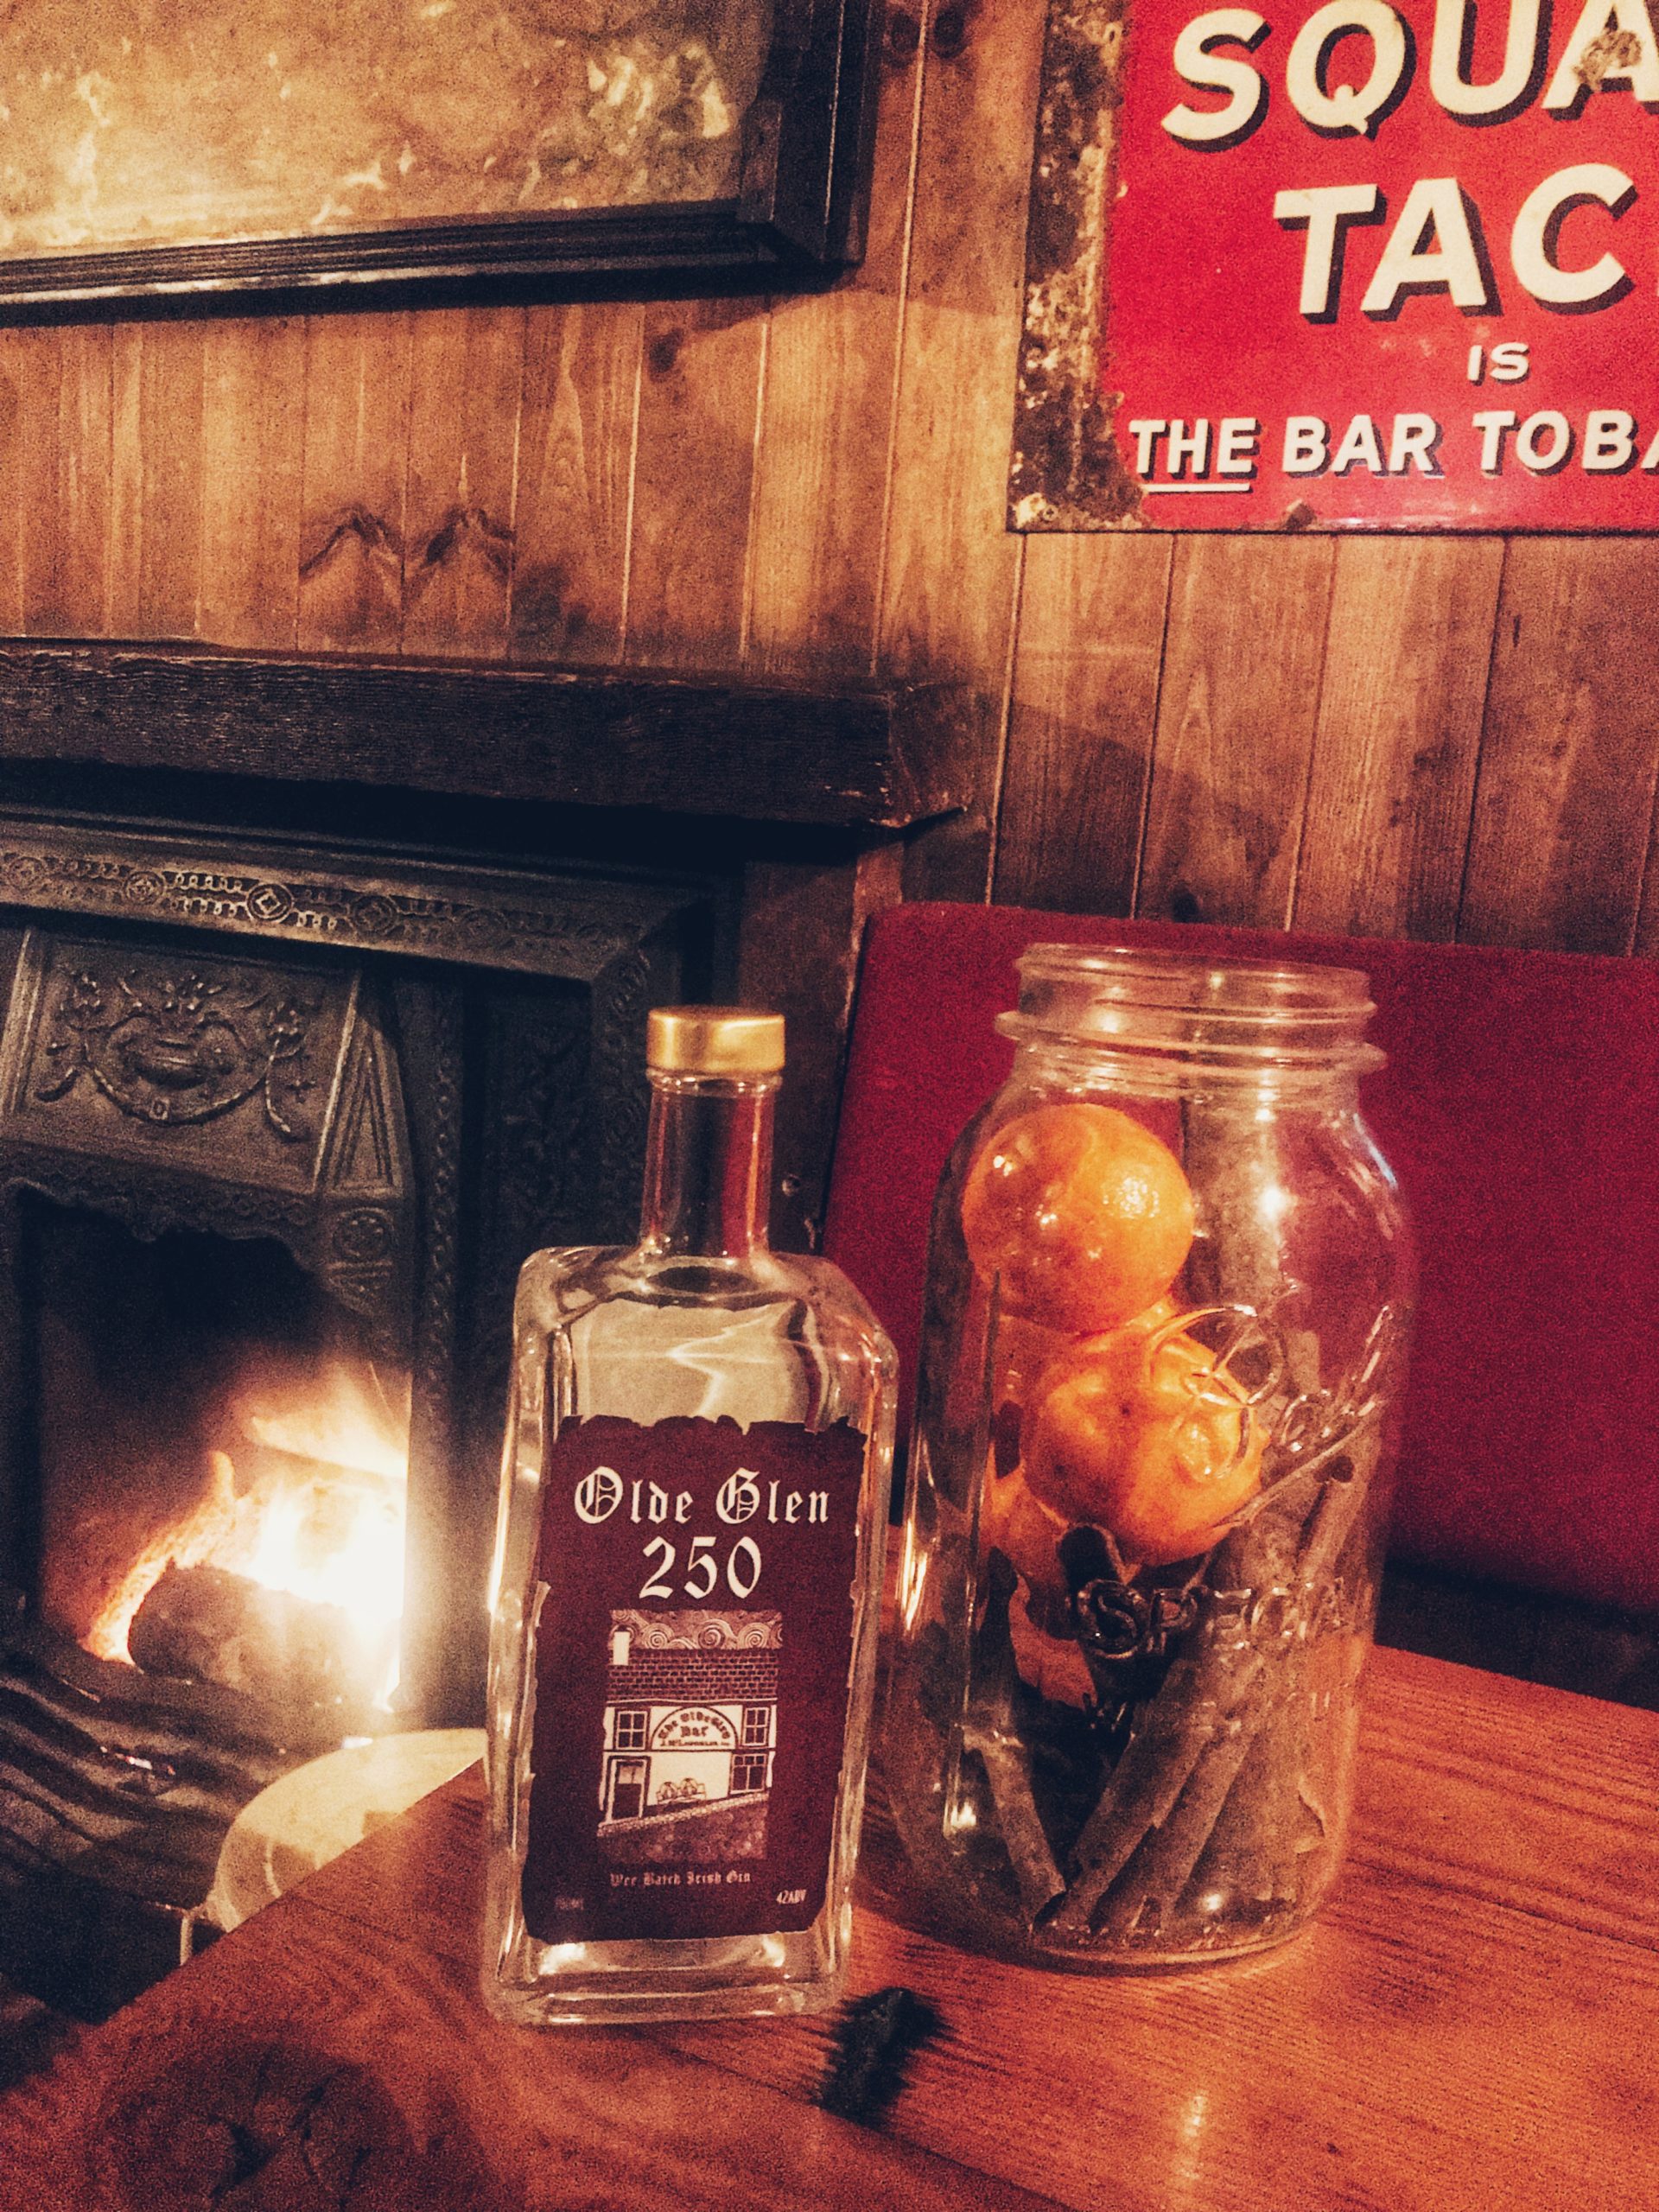 Olde Glen Bar Gin scaled-Donegal Food TOurs